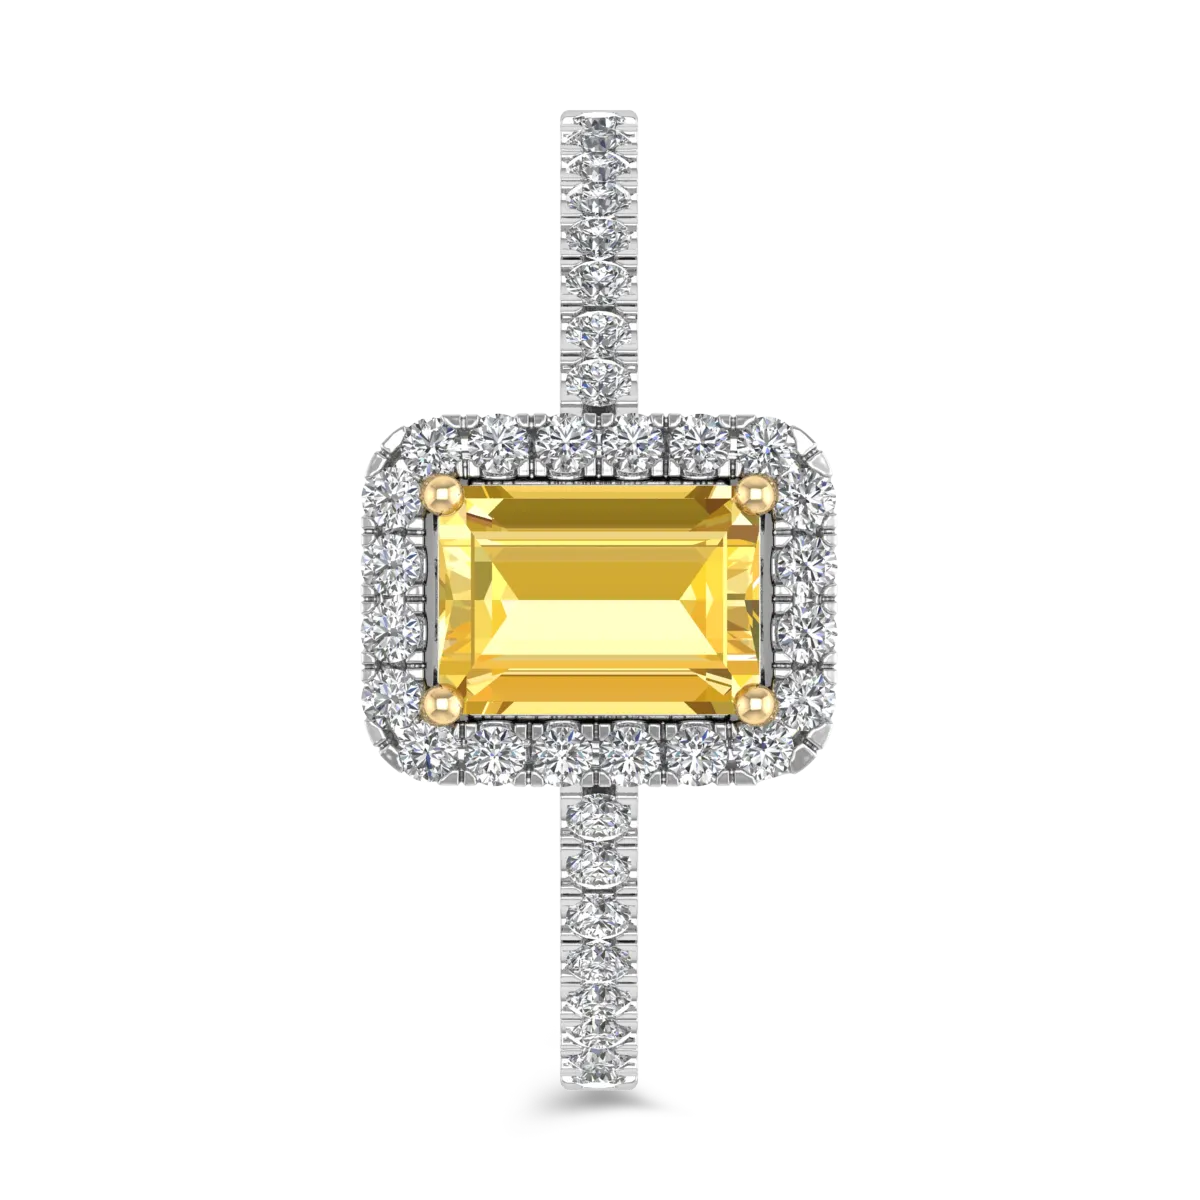 18K white gold engagement ring with 0.66ct yellow sapphire and 0.28ct diamonds